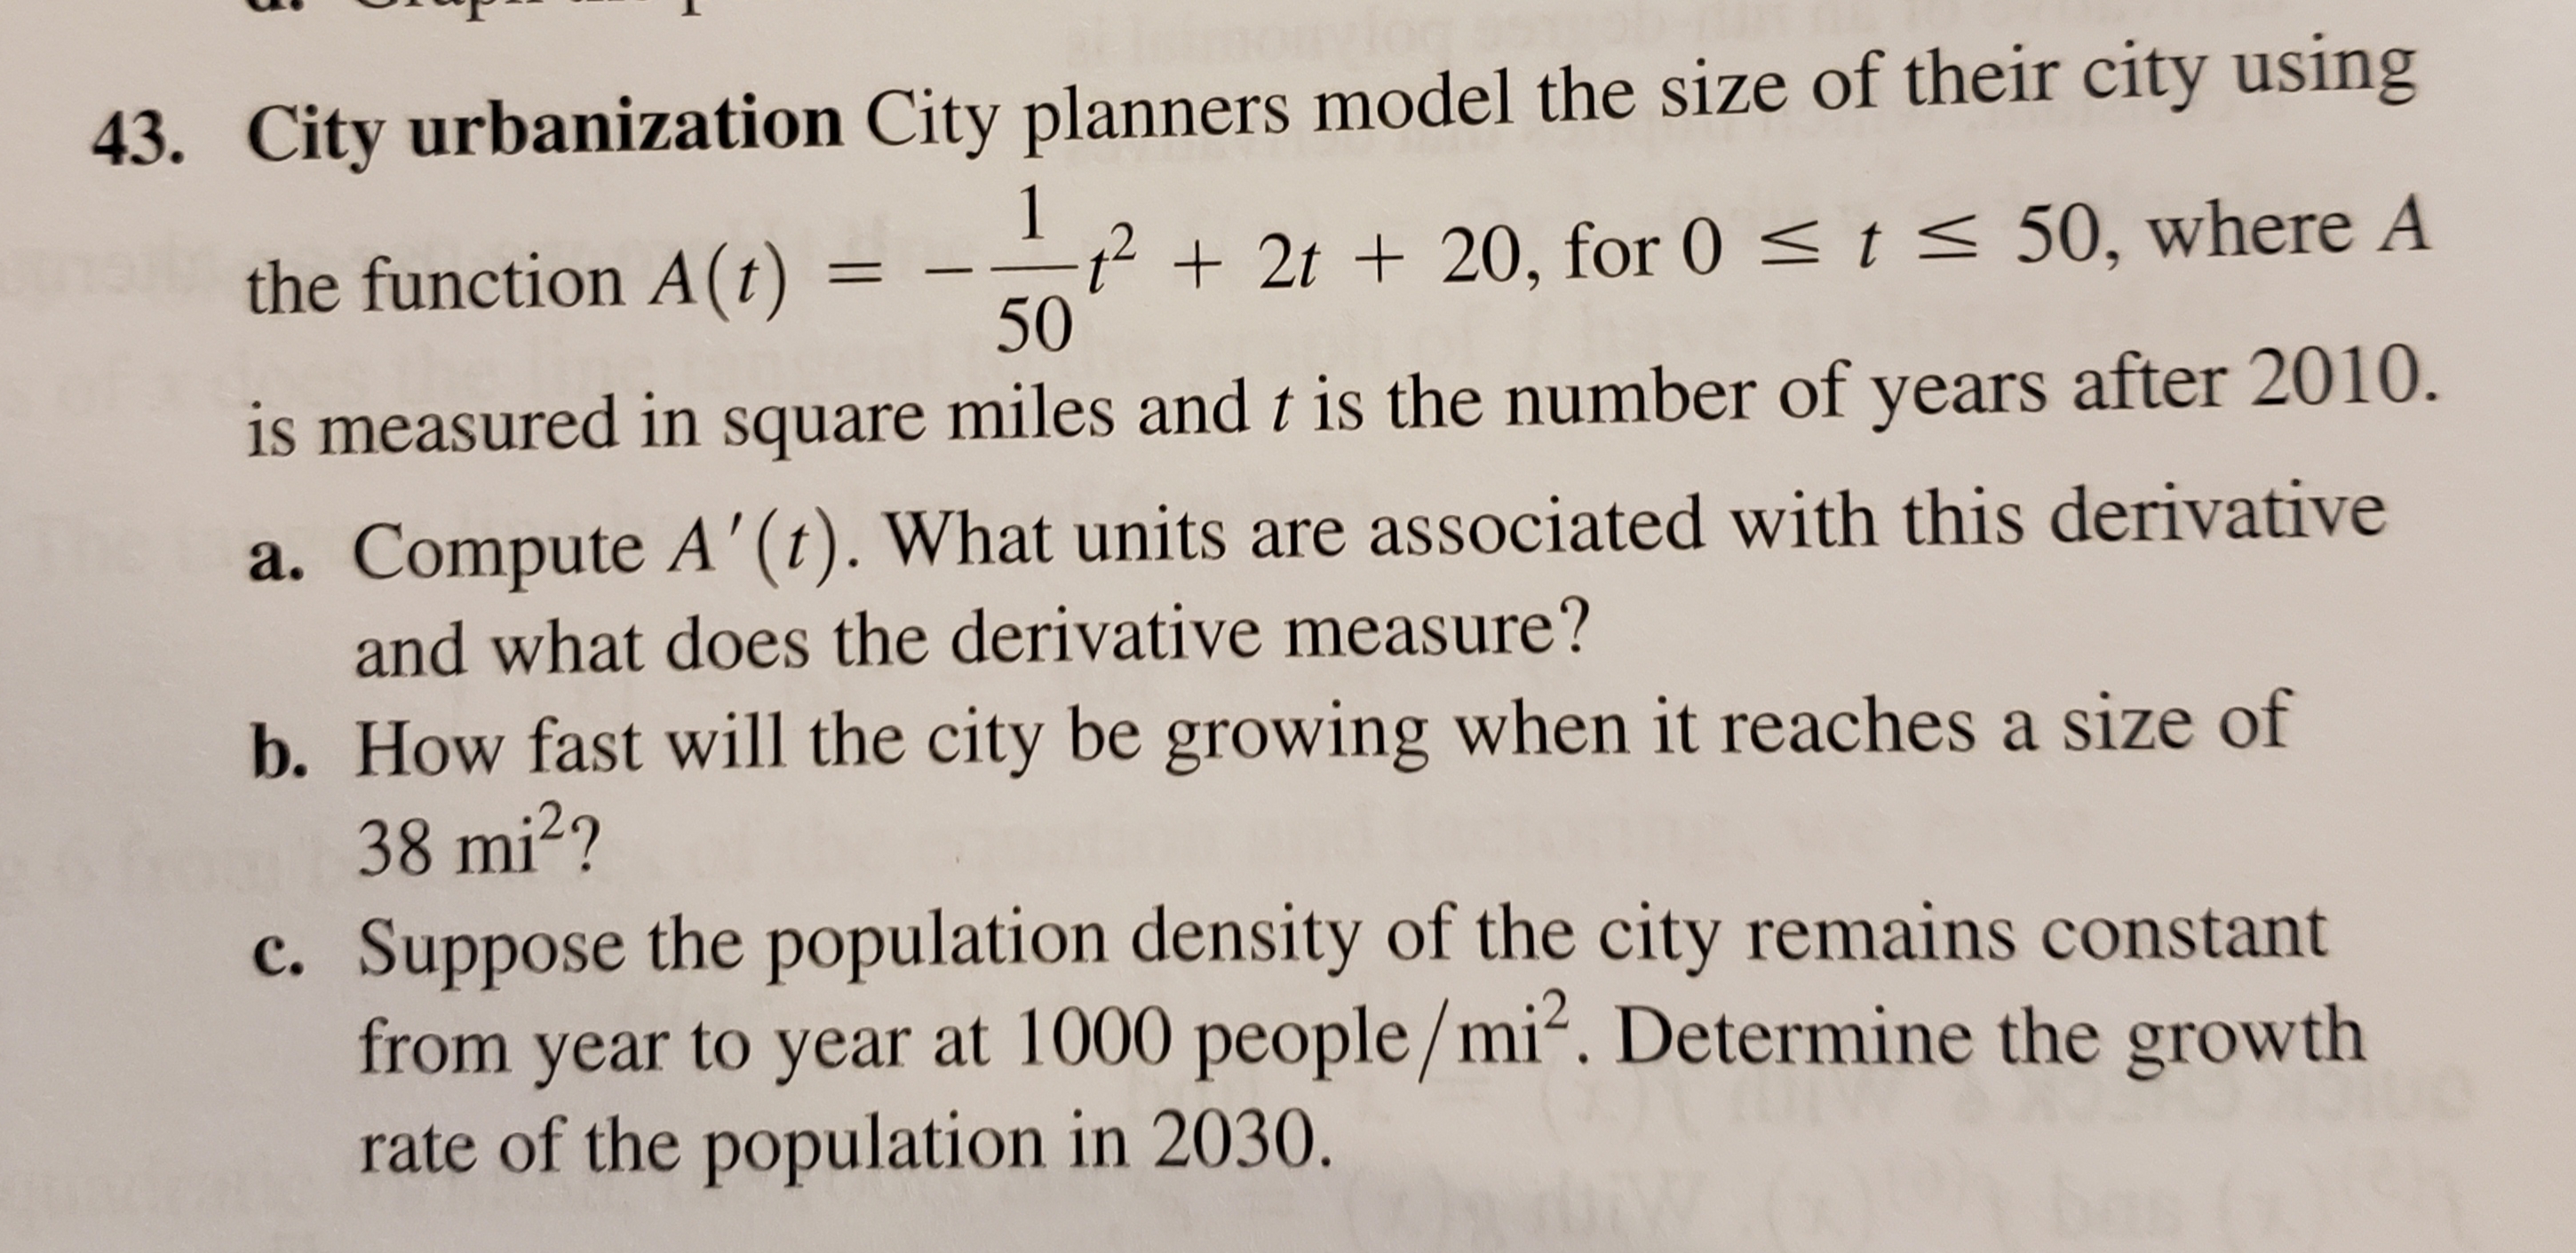 43. City urbanization City planners model the size of their city using
1
t<50, where A
t2t20, for 0
50
the function A(t)
is measured in square miles and t is the number of years after 2010.
a. Compute A'(t). What units are associated with this derivative
and what does the derivative measure?
b. How fast will the city be growing when it reaches a size of
38 mi2?
c. Suppose the population density of the city remains constant
from year to year at 1000 people/mi2. Determine the growth
rate of the population in 2030.
